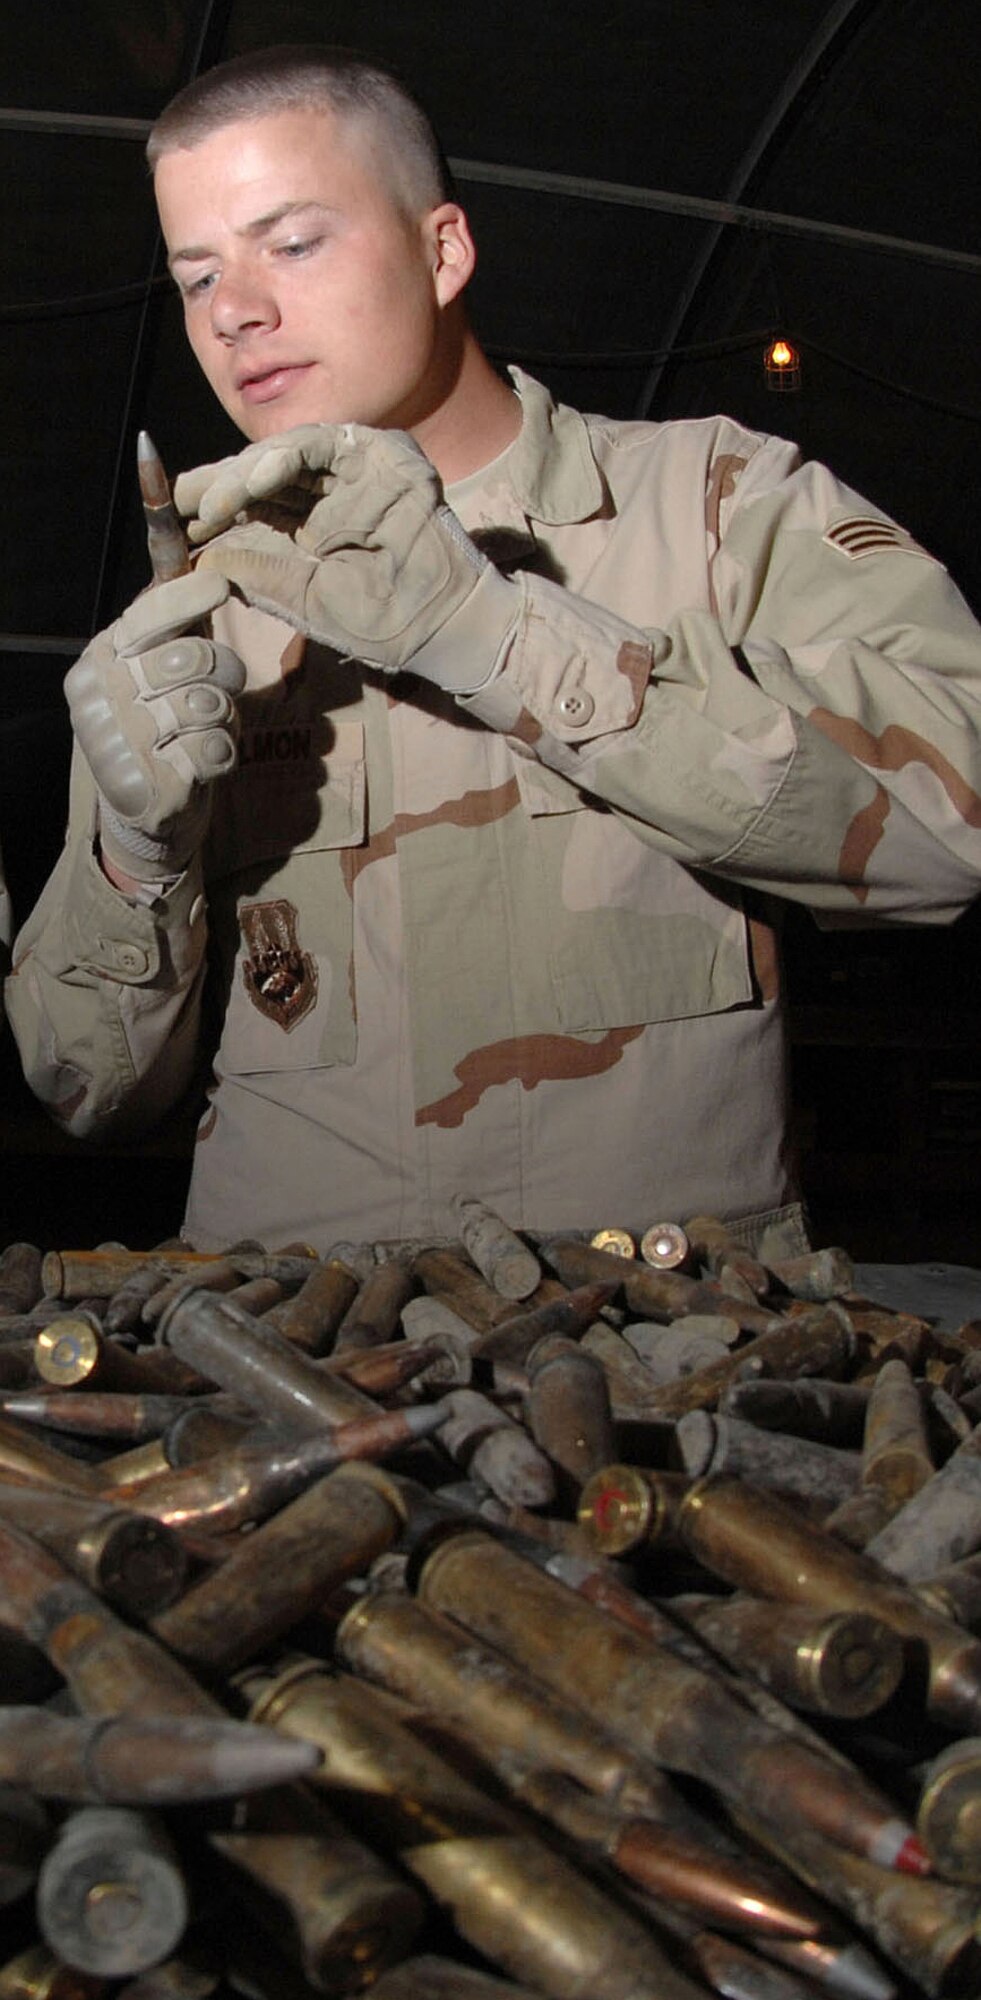 Staff Sgt. Michael Bigelow (left) and Senior Airman David Hallmon inspect unfired ammunition March 21 at Kirkuk Air Base, Iraq. All unserviceable ammo is sent to the explosive ordnance disposal team for detonation. The Airmen are munitions specialists with the 506th Air Expeditionary Group. Airman Hallmon is deployed from the 377th Maintenance Squadron (U.S. Air Force photo/Senior Airman Bradley A. Lail) 